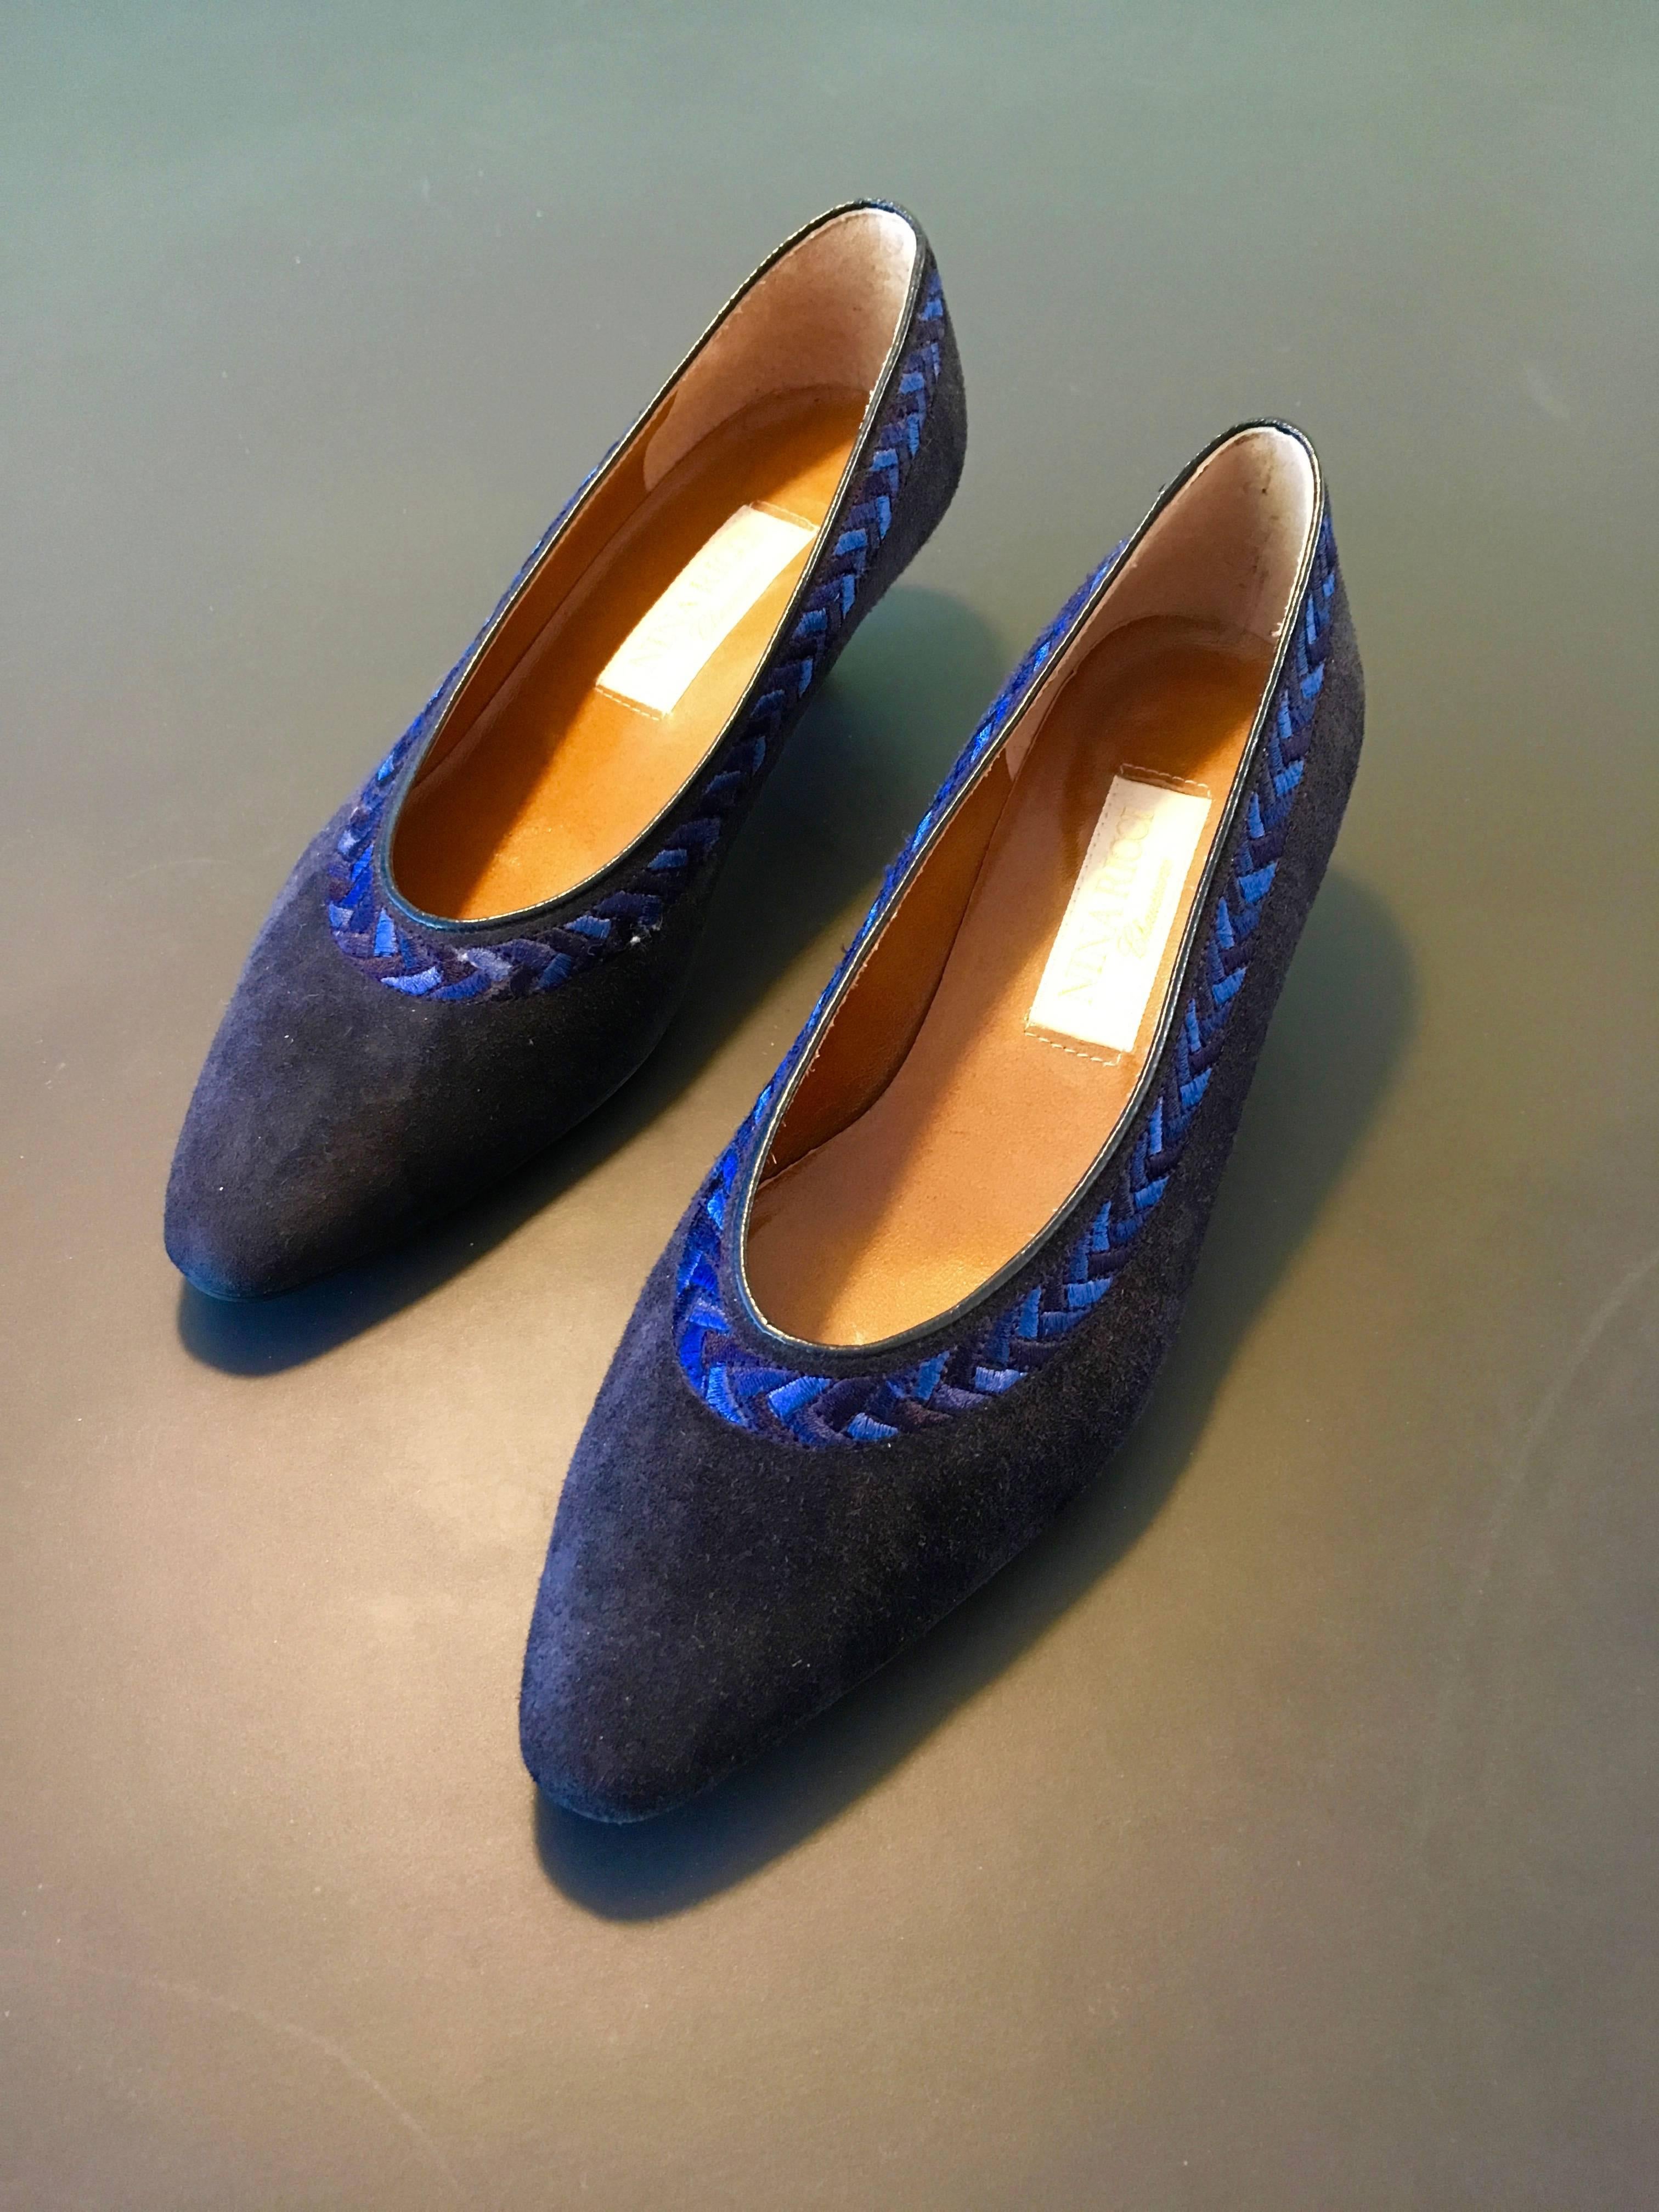 Nina Ricci Chaussures navy suede low heel slip on shoe is a size 6.  Never worn. Classic design to be worn & enjoyed with your vintage Chanel pants or your YSL skirt.

1.3/4